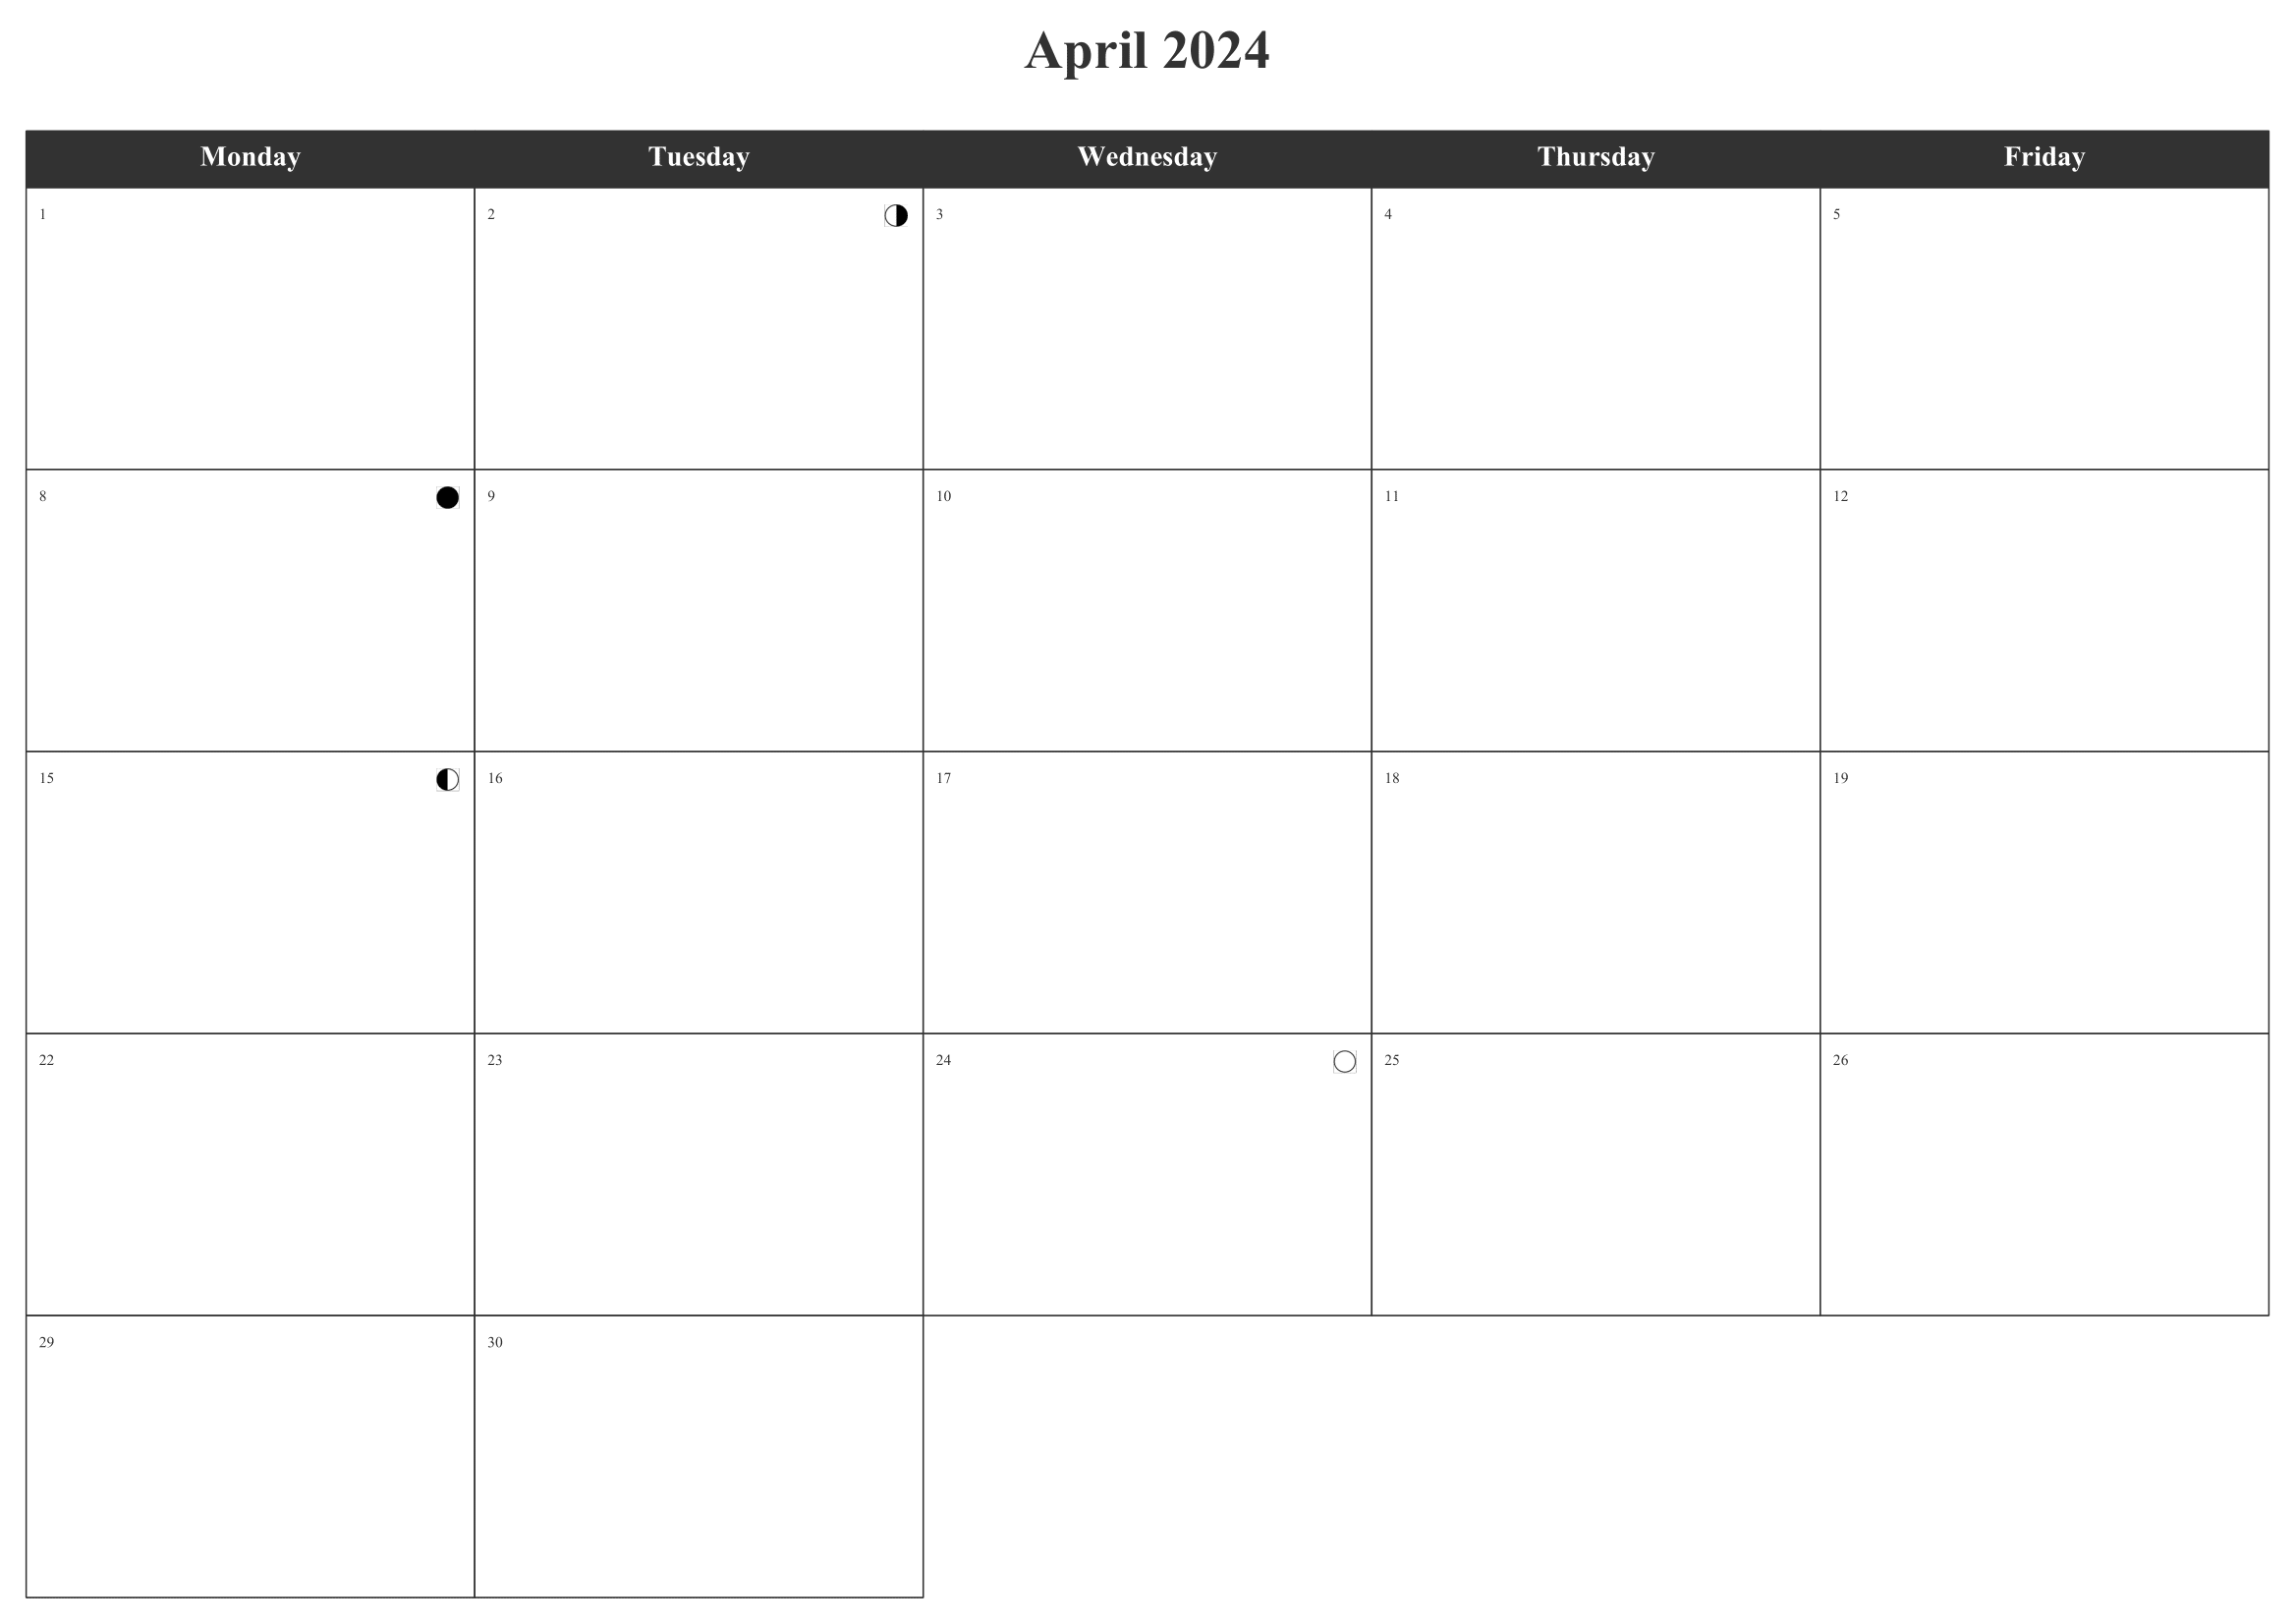 Monthly calendar - Moon phases